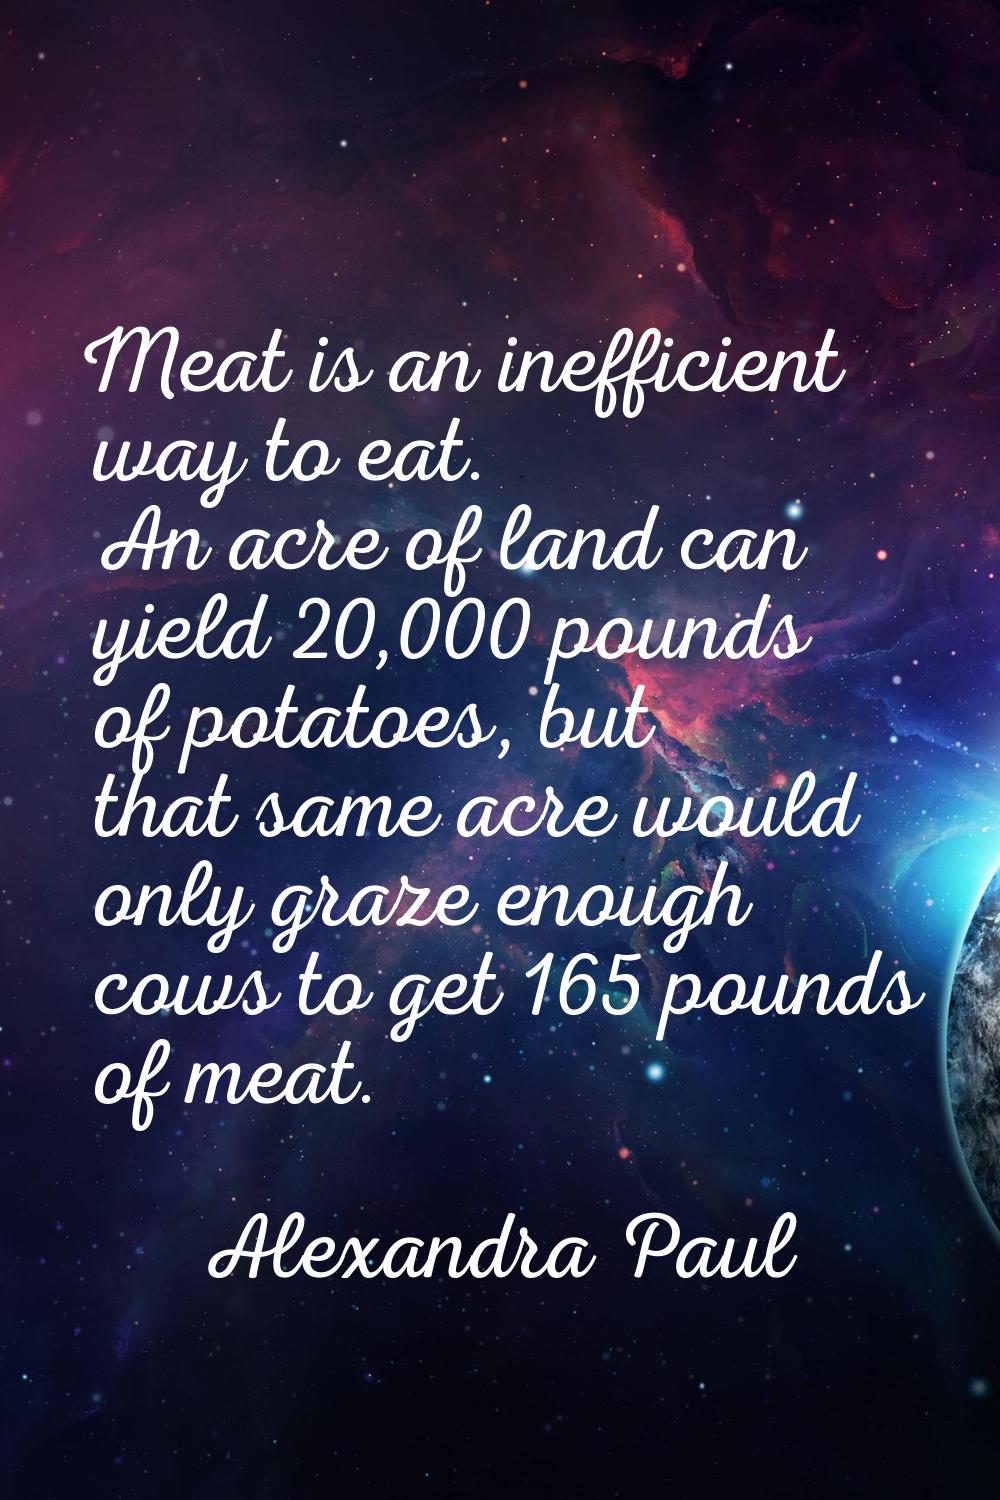 Meat is an inefficient way to eat. An acre of land can yield 20,000 pounds of potatoes, but that sa